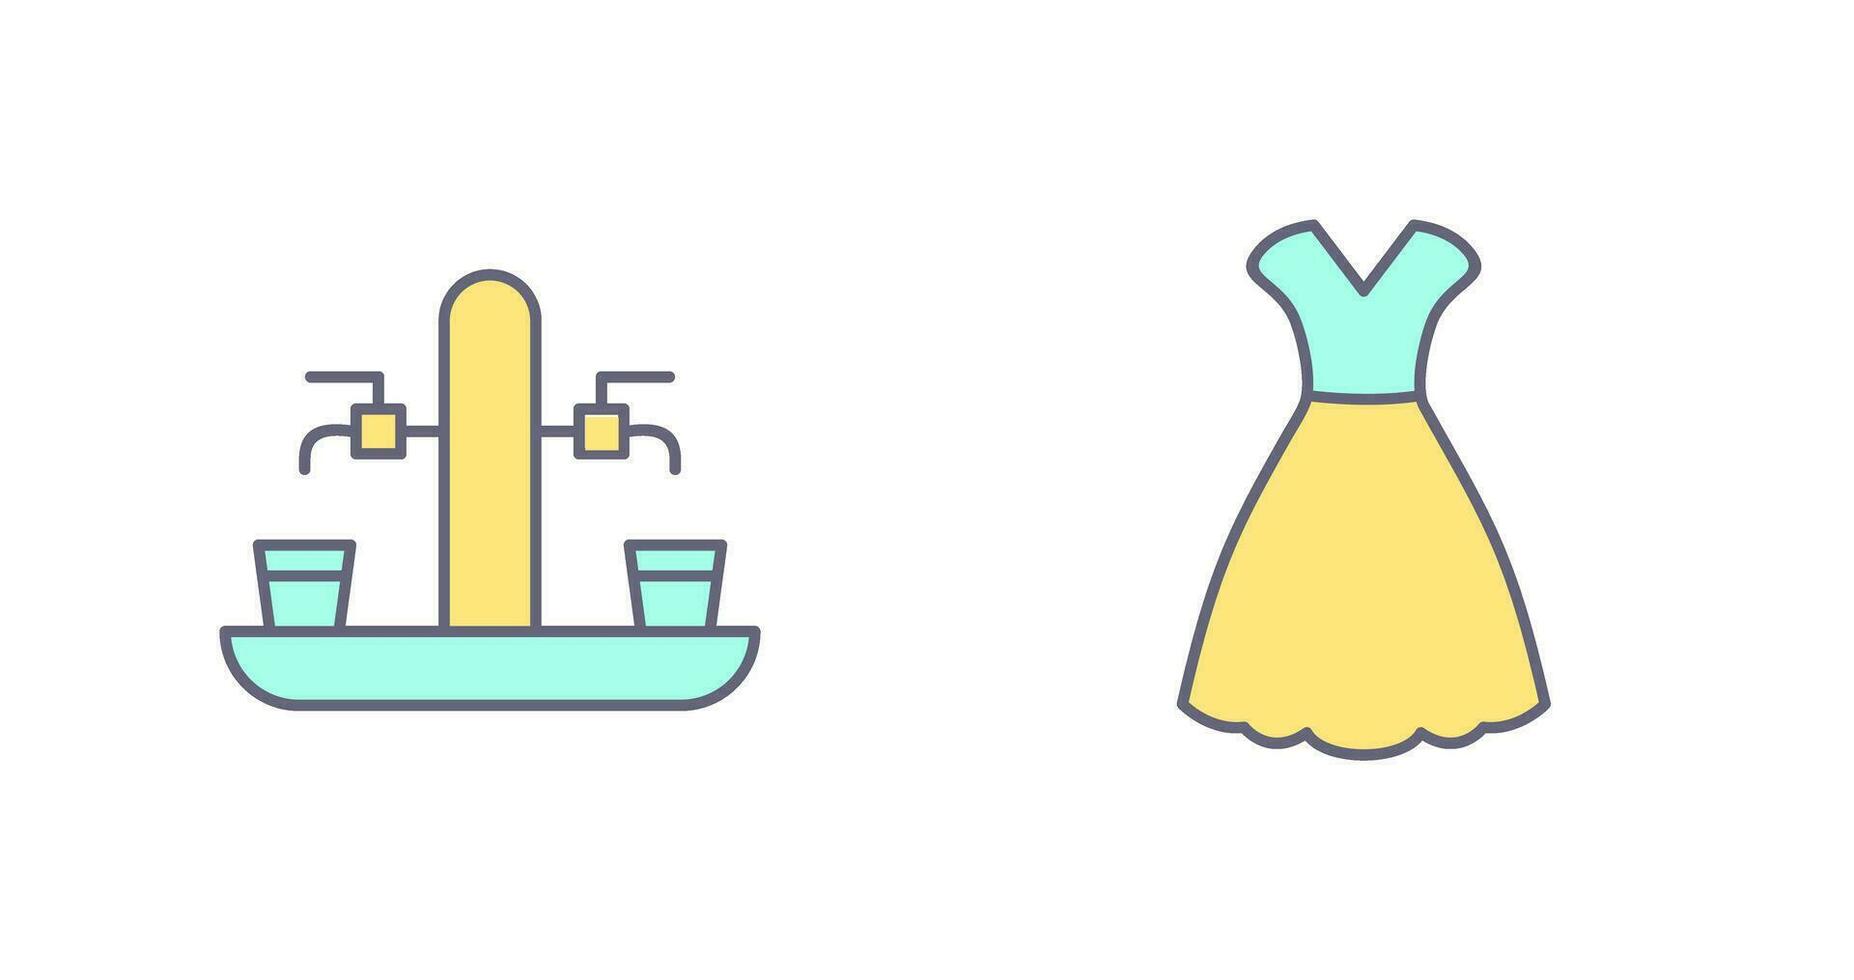 Beer Tap and Woman Dress Icon vector